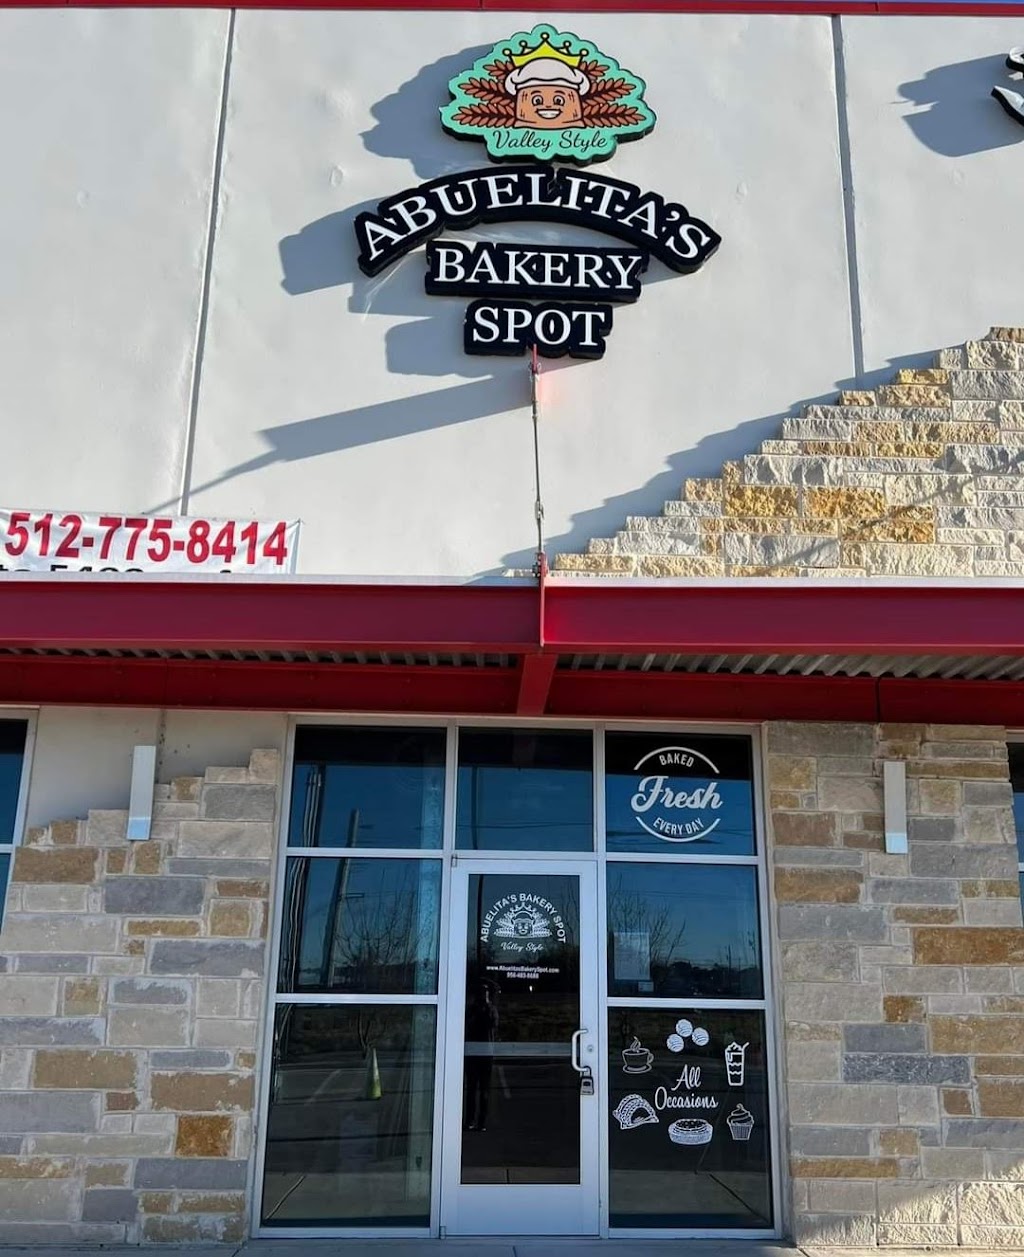 Abuelita’s Bakery Spot | 21511 Interstate 35 Frontage Rd, Kyle, TX 78640, USA | Phone: (956) 483-8688